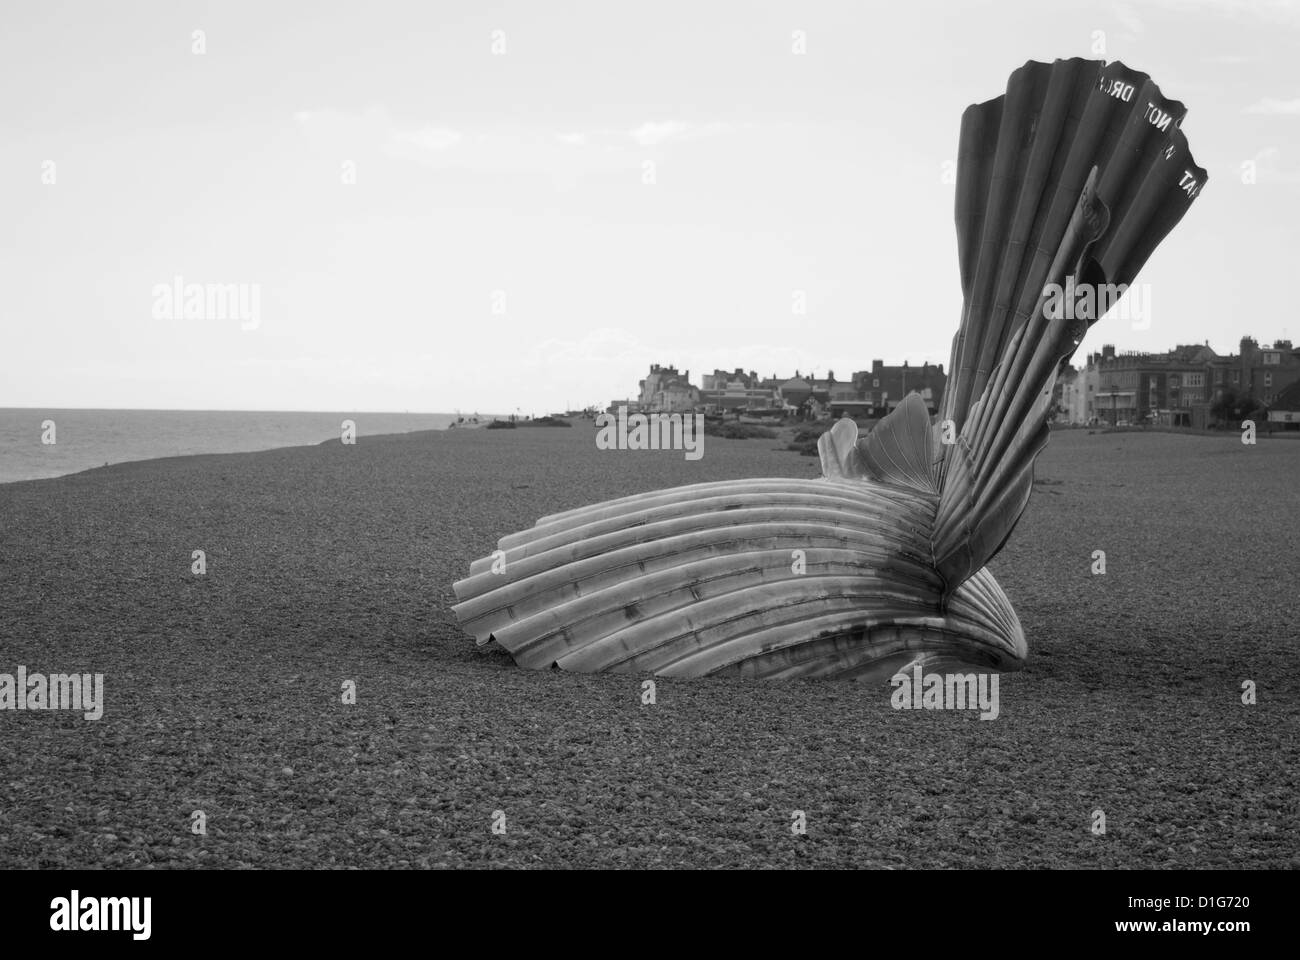 A black and white image of The Scallop sculpture by Maggi Hambling on Aldeburgh Beach Stock Photo